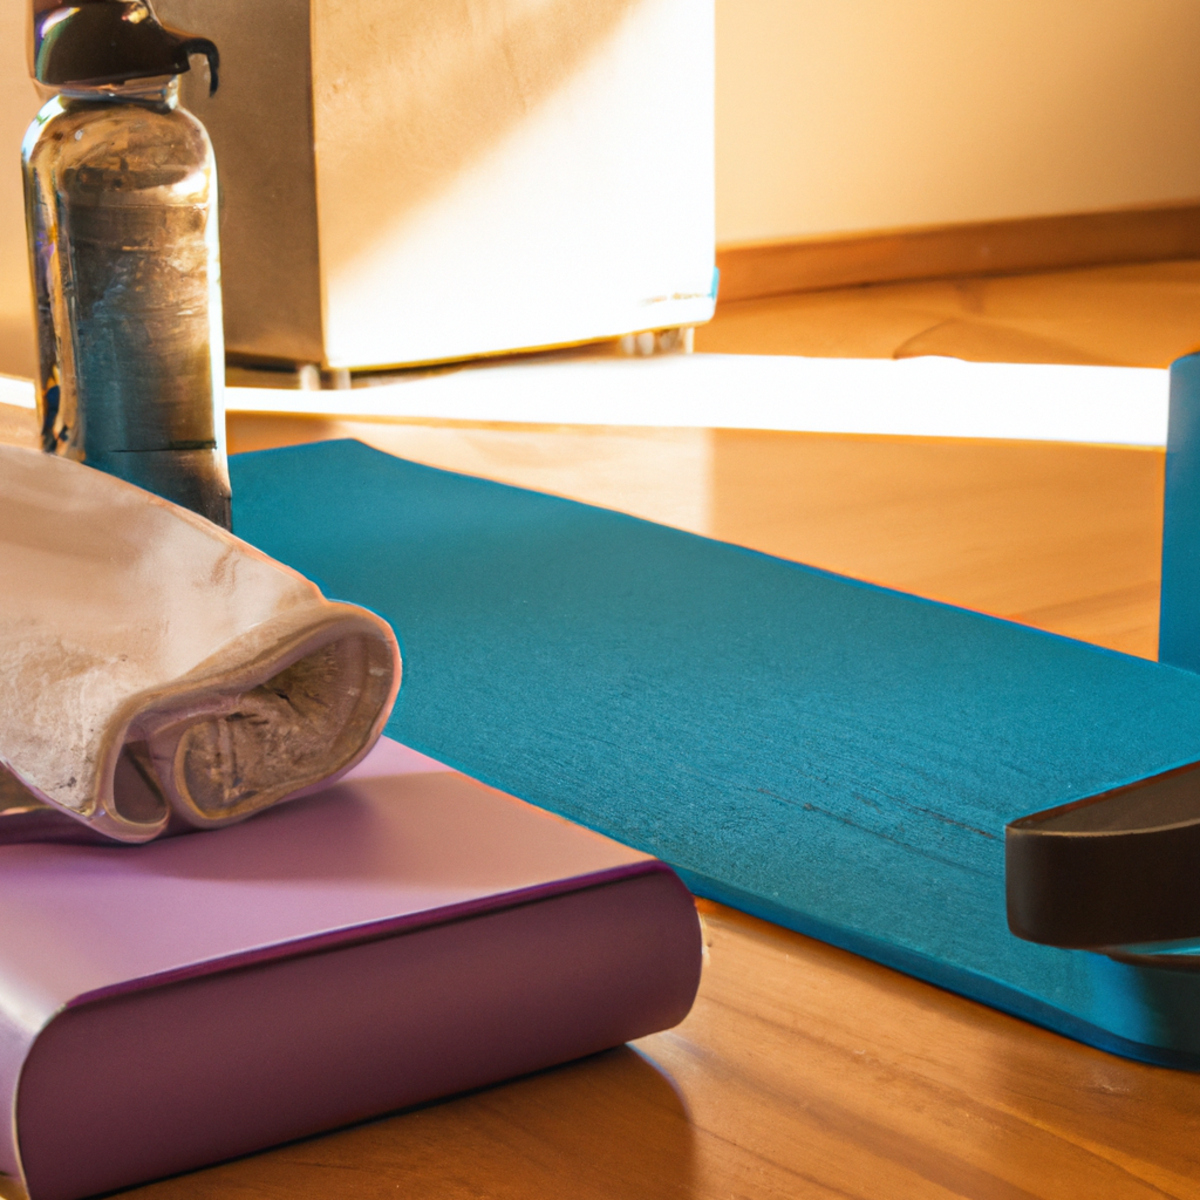 The photo captures a serene scene of a yoga mat laid out on a wooden floor, surrounded by various objects. A water bottle and towel sit to the side, while a yoga block and strap are placed nearby. In the background, a Pilates reformer machine can be seen, adding to the variety of non-impact exercise options available. The lighting is soft and natural, creating a calming atmosphere that encourages relaxation and focus. Overall, the photo perfectly encapsulates the essence of yoga and Pilates as gentle, yet effective forms of exercise suitable for all ages.